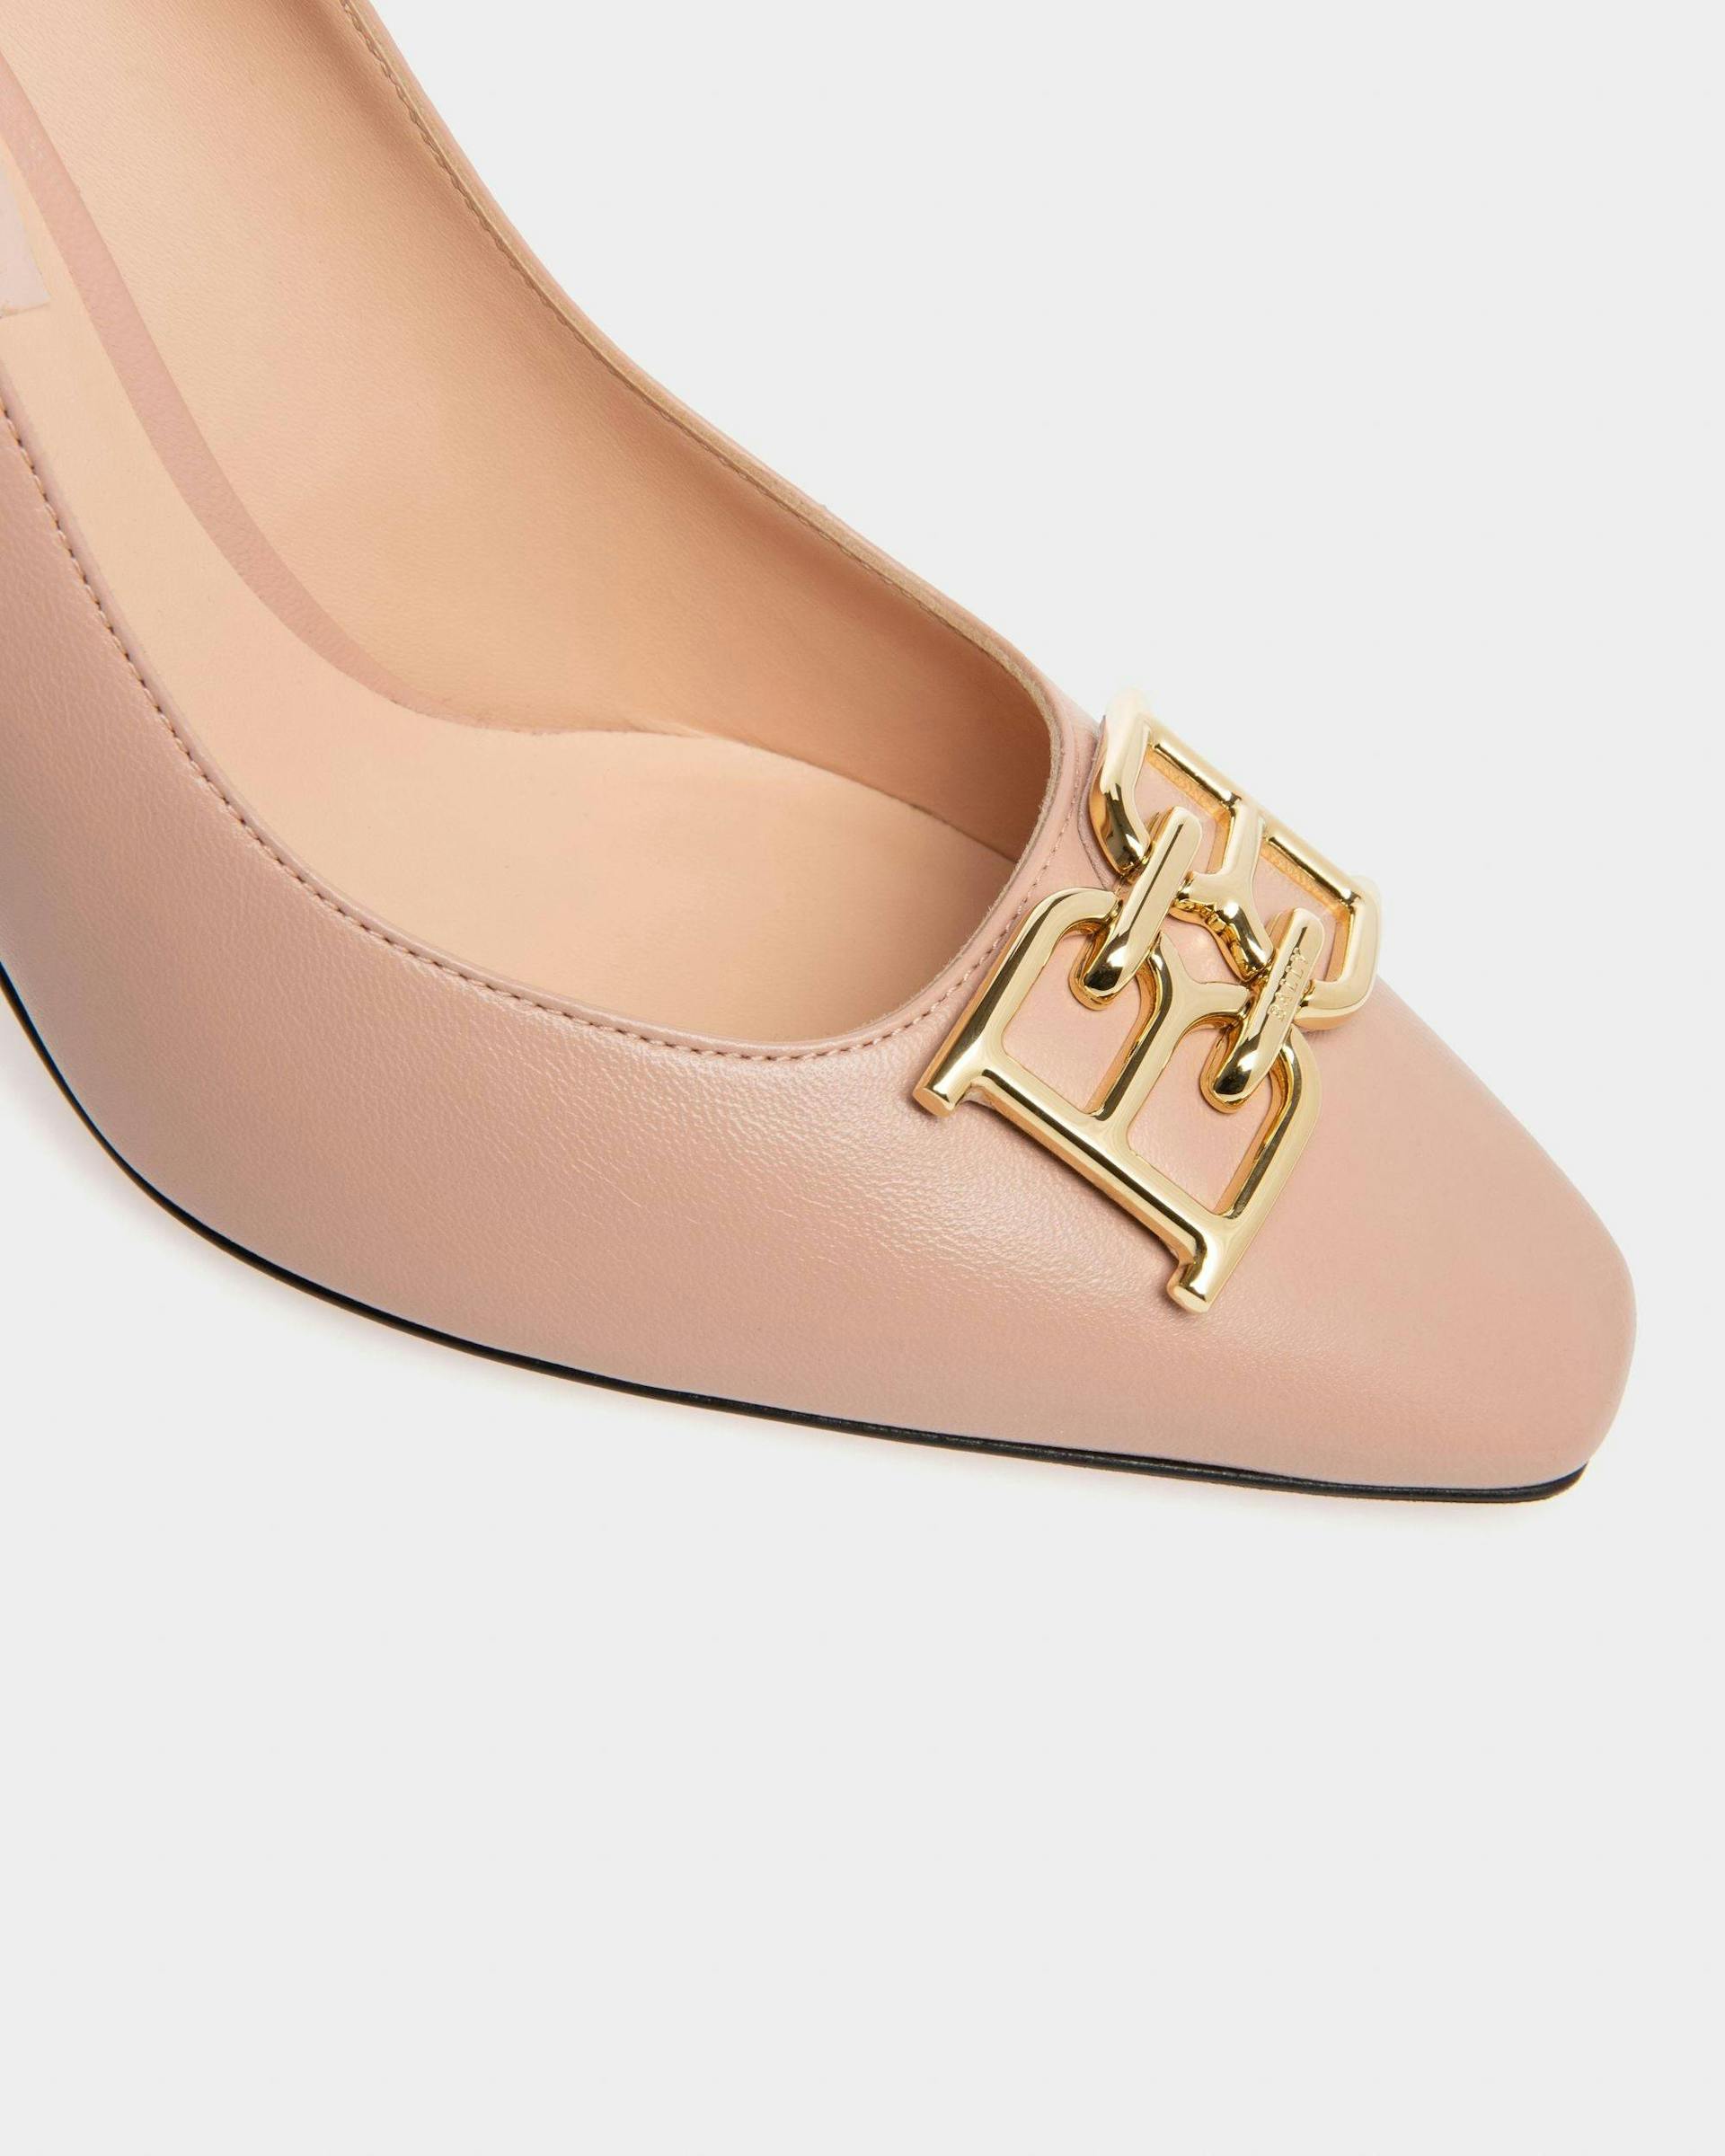 Evanca Leather Pumps In Pale Pink - Women's - Bally - 05